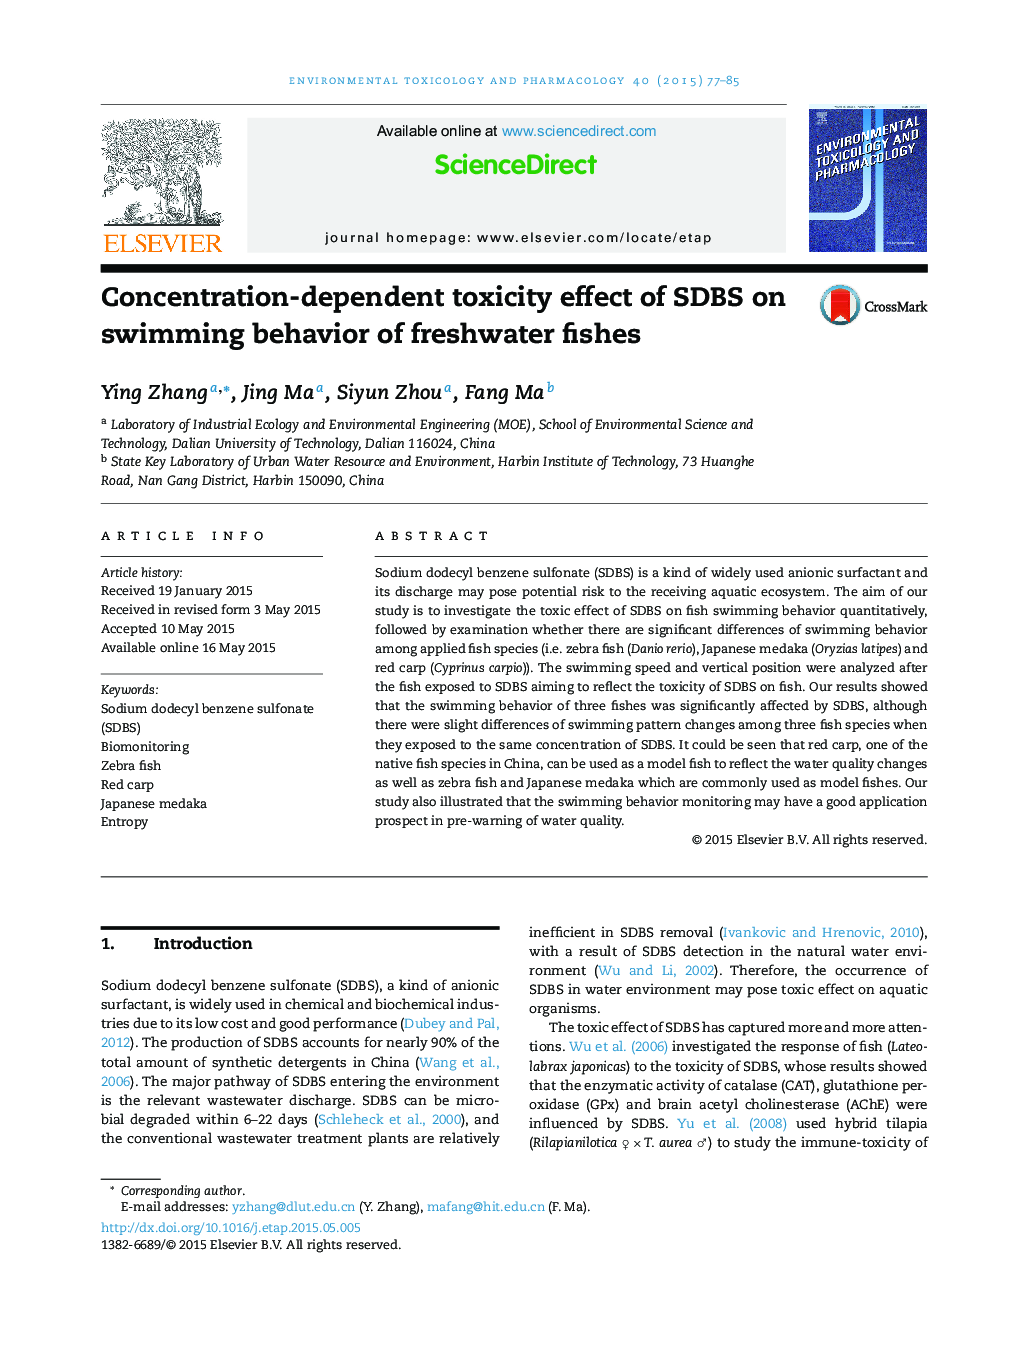 Concentration-dependent toxicity effect of SDBS on swimming behavior of freshwater fishes